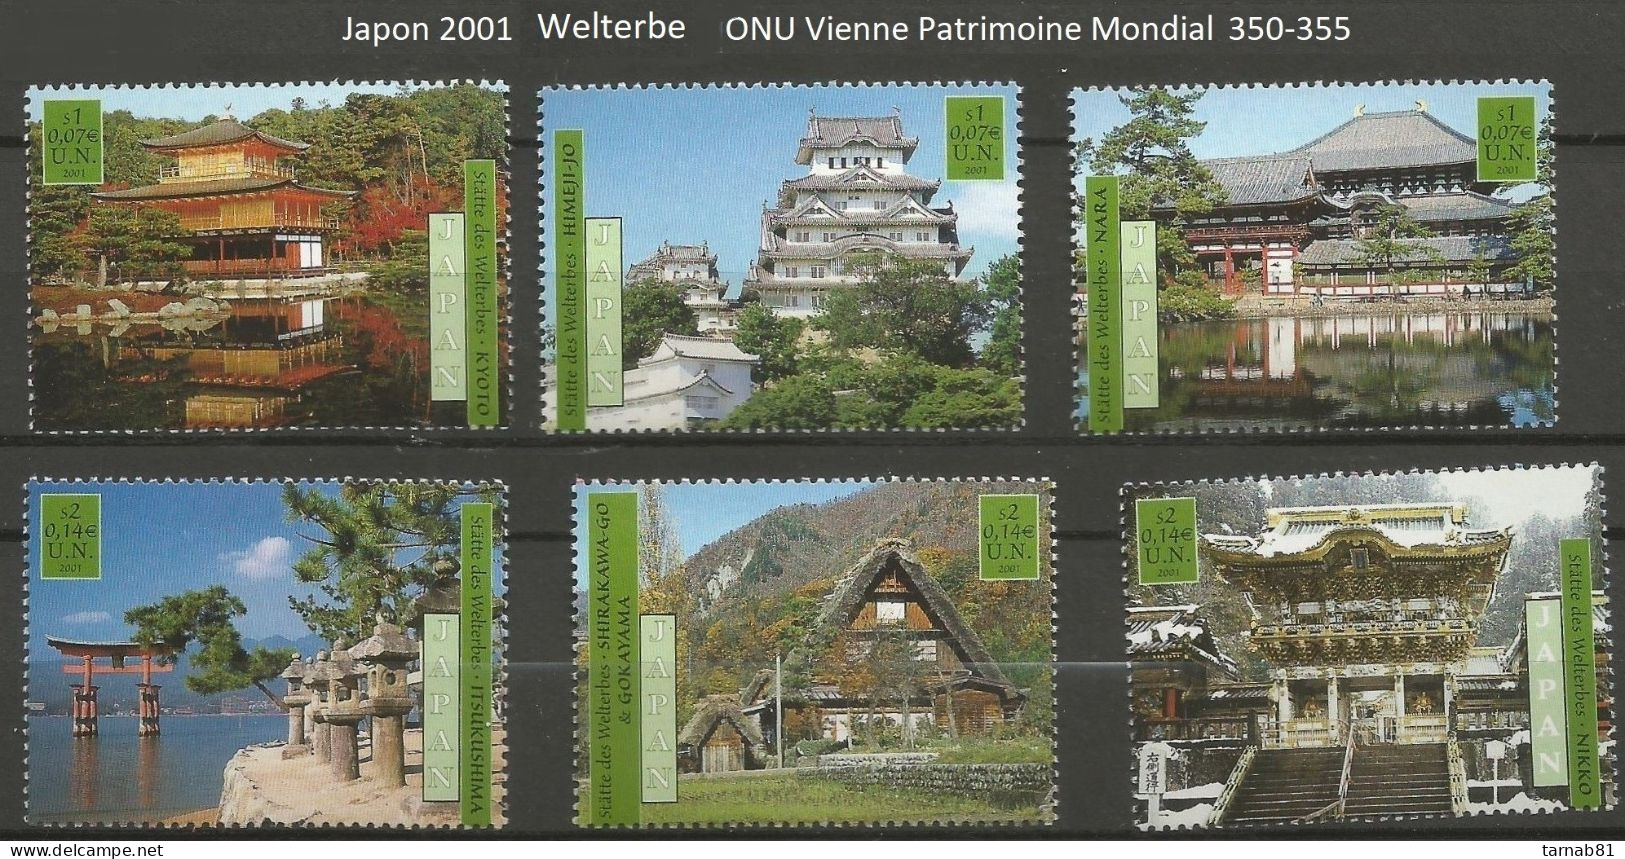 ONU Nations Unies Complet Vienne **  2000 2001 2002 2003 2004 2005 2006 2007 Patrimoine Mondial Issus Carnets - Unused Stamps